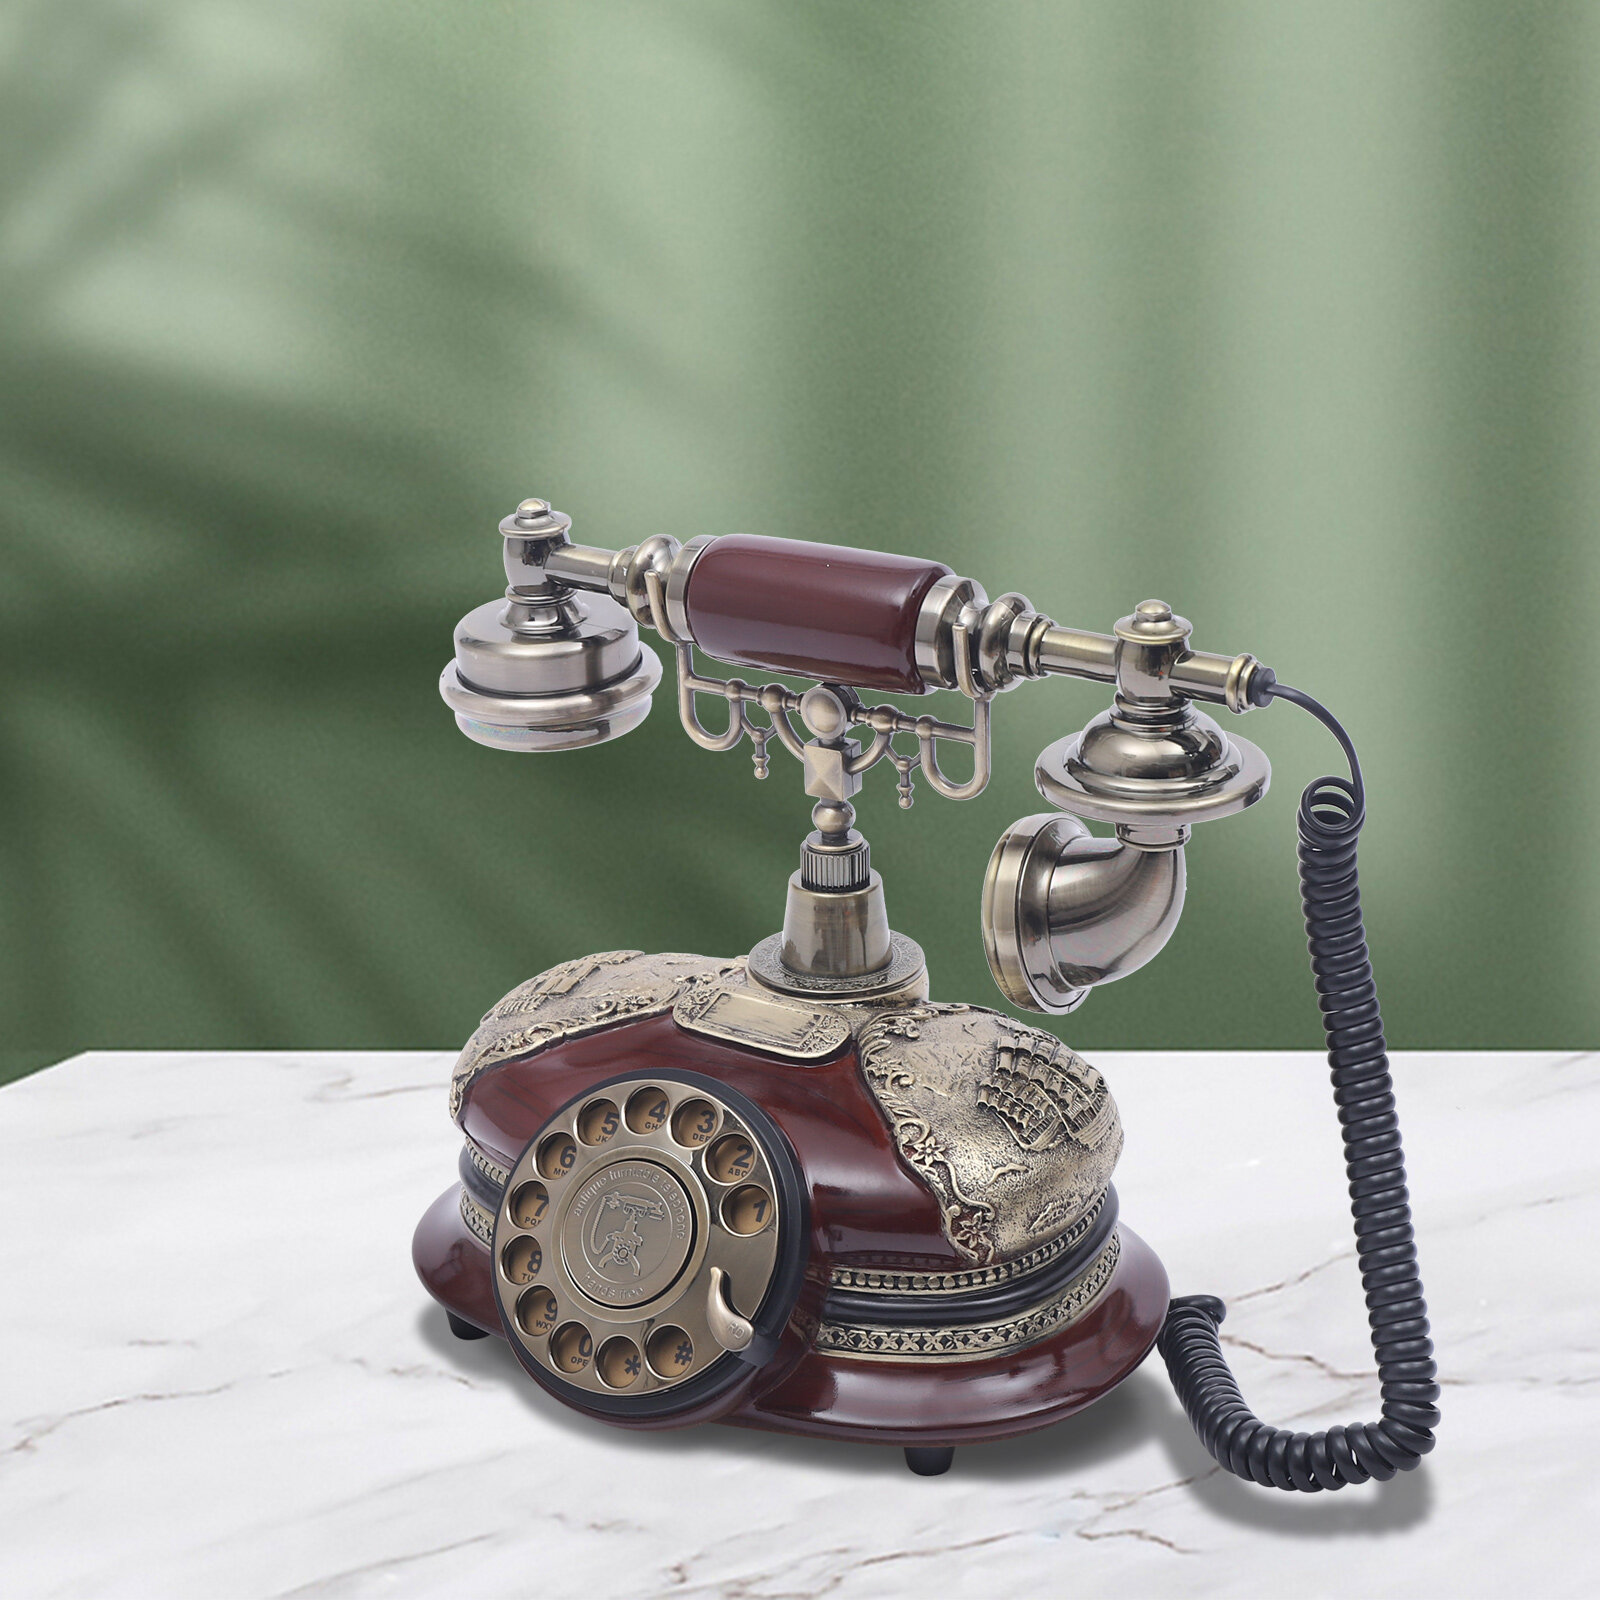 How to Use a Rotary Dial Phone / Telephone 